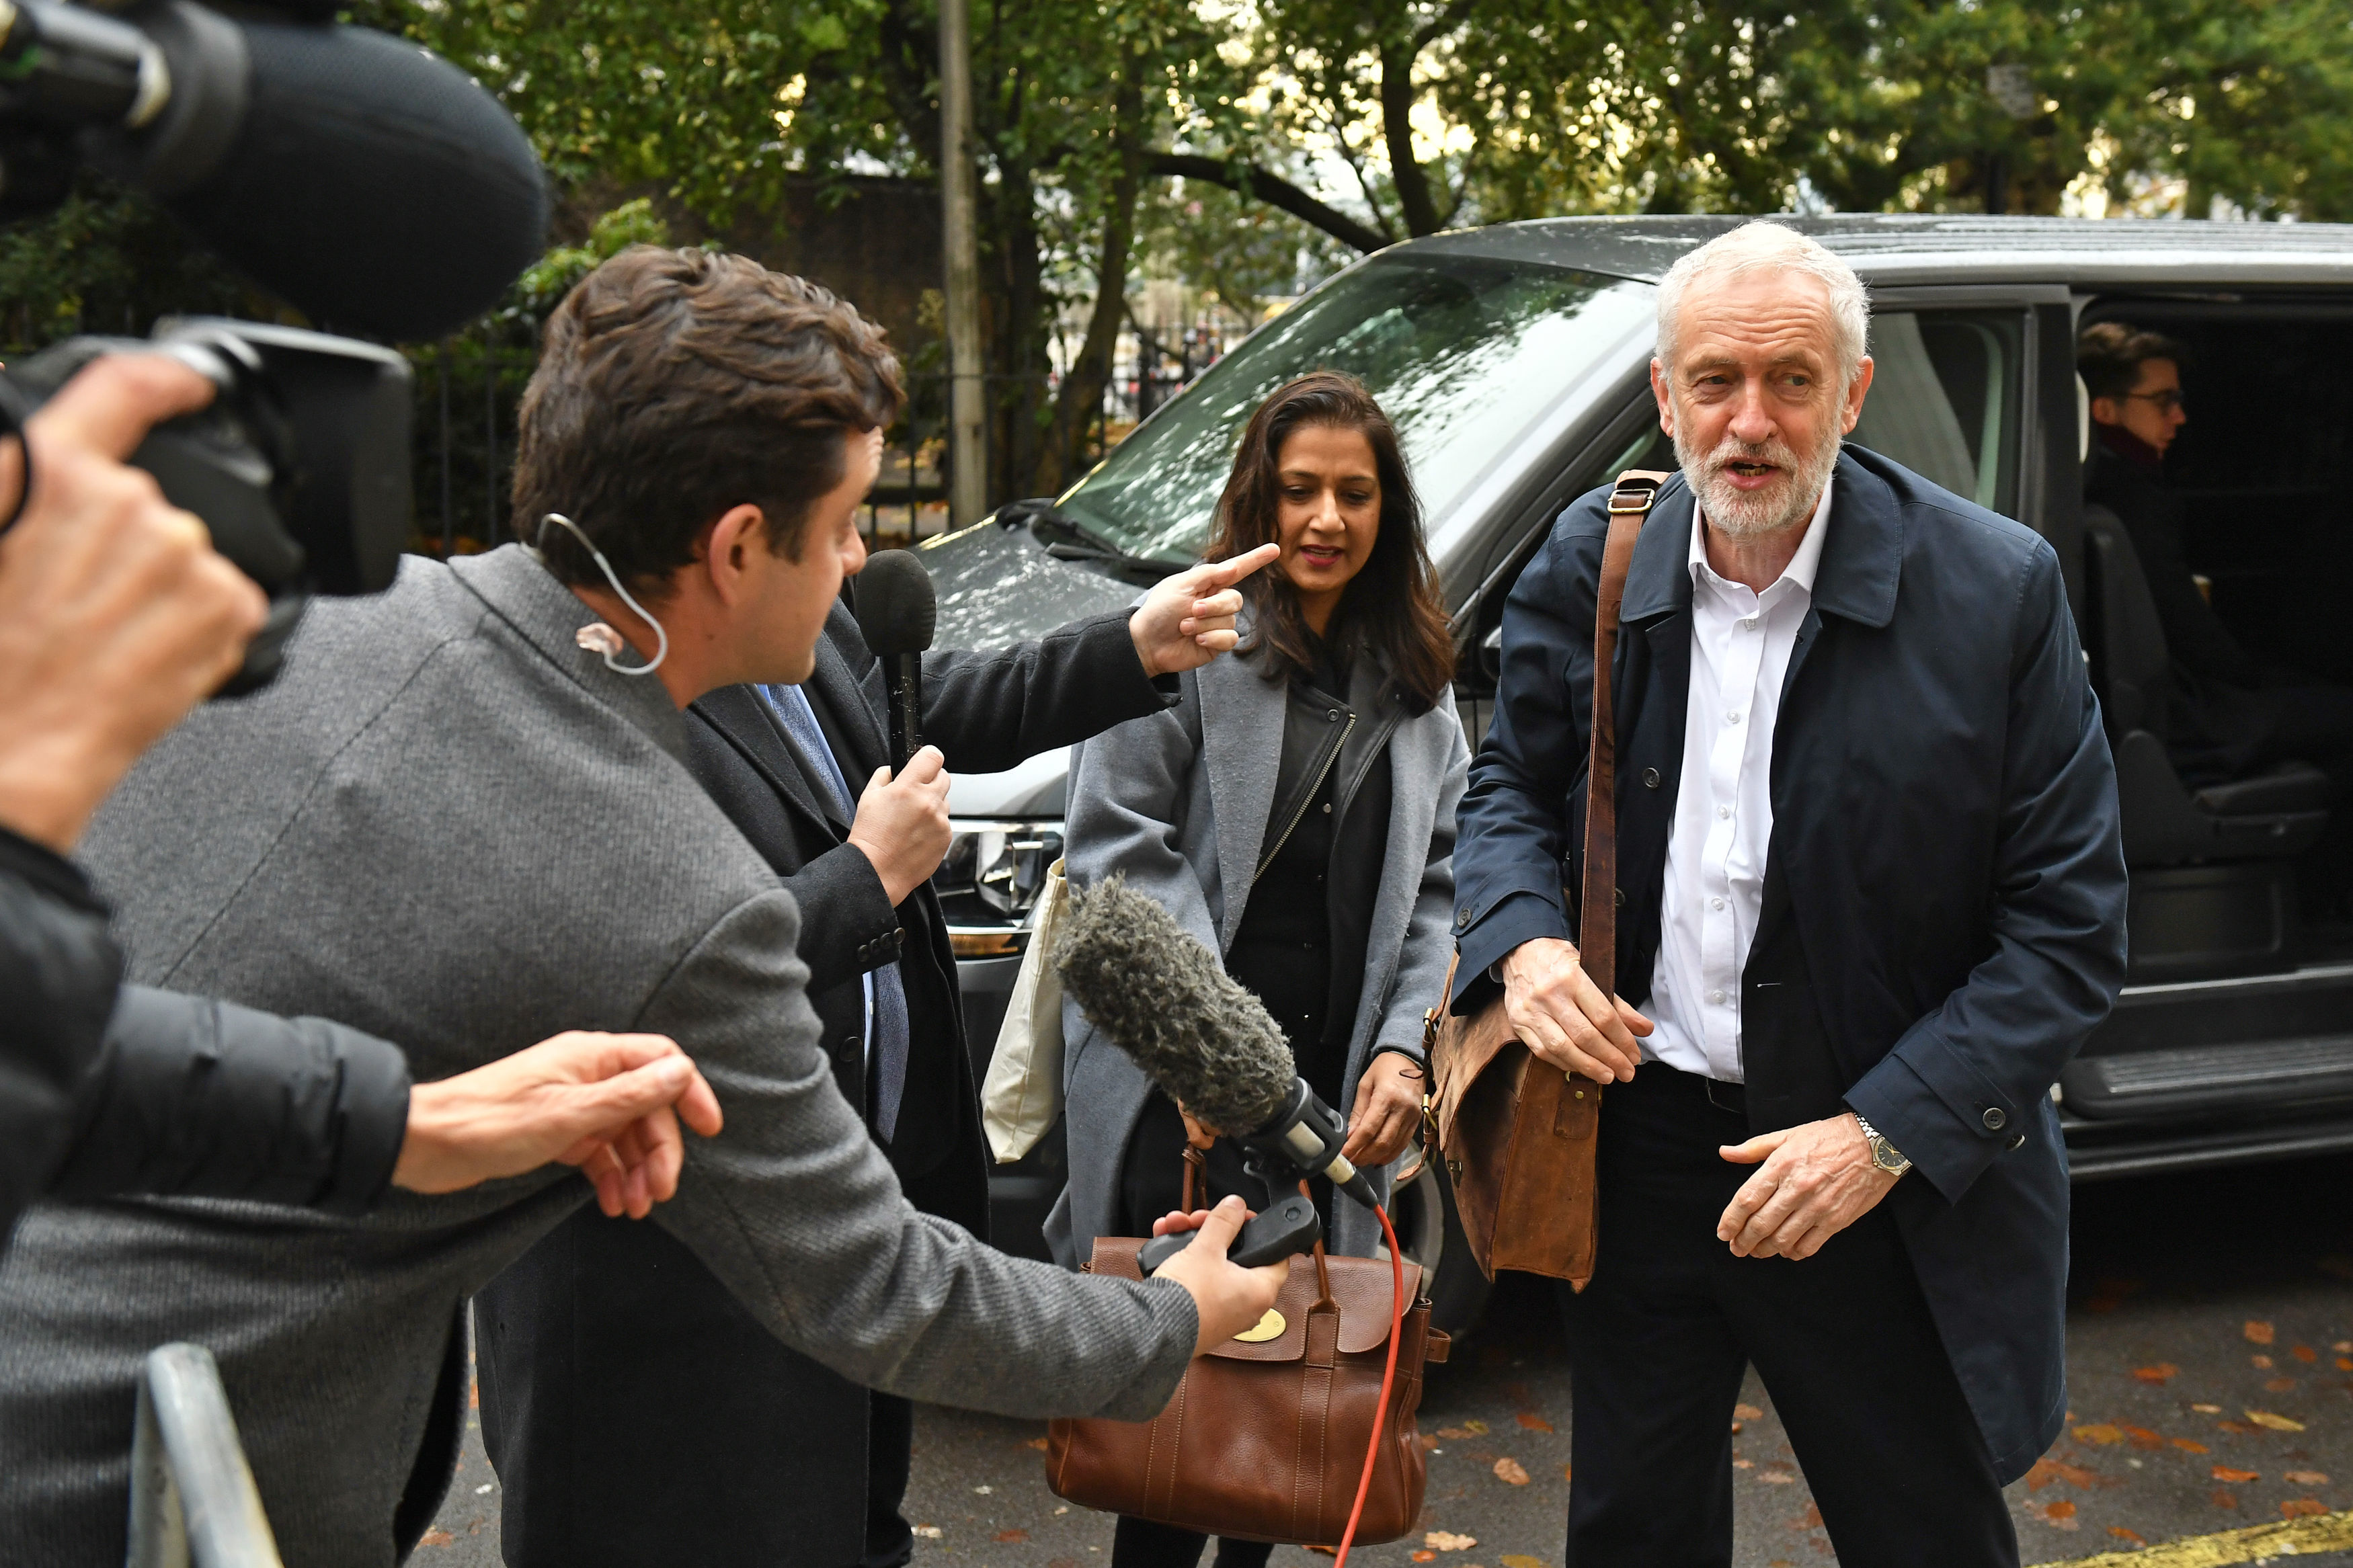 Labour Party leader Jeremy Corbyn arrives for a Labour clause V meeting on the manifesto at Savoy .